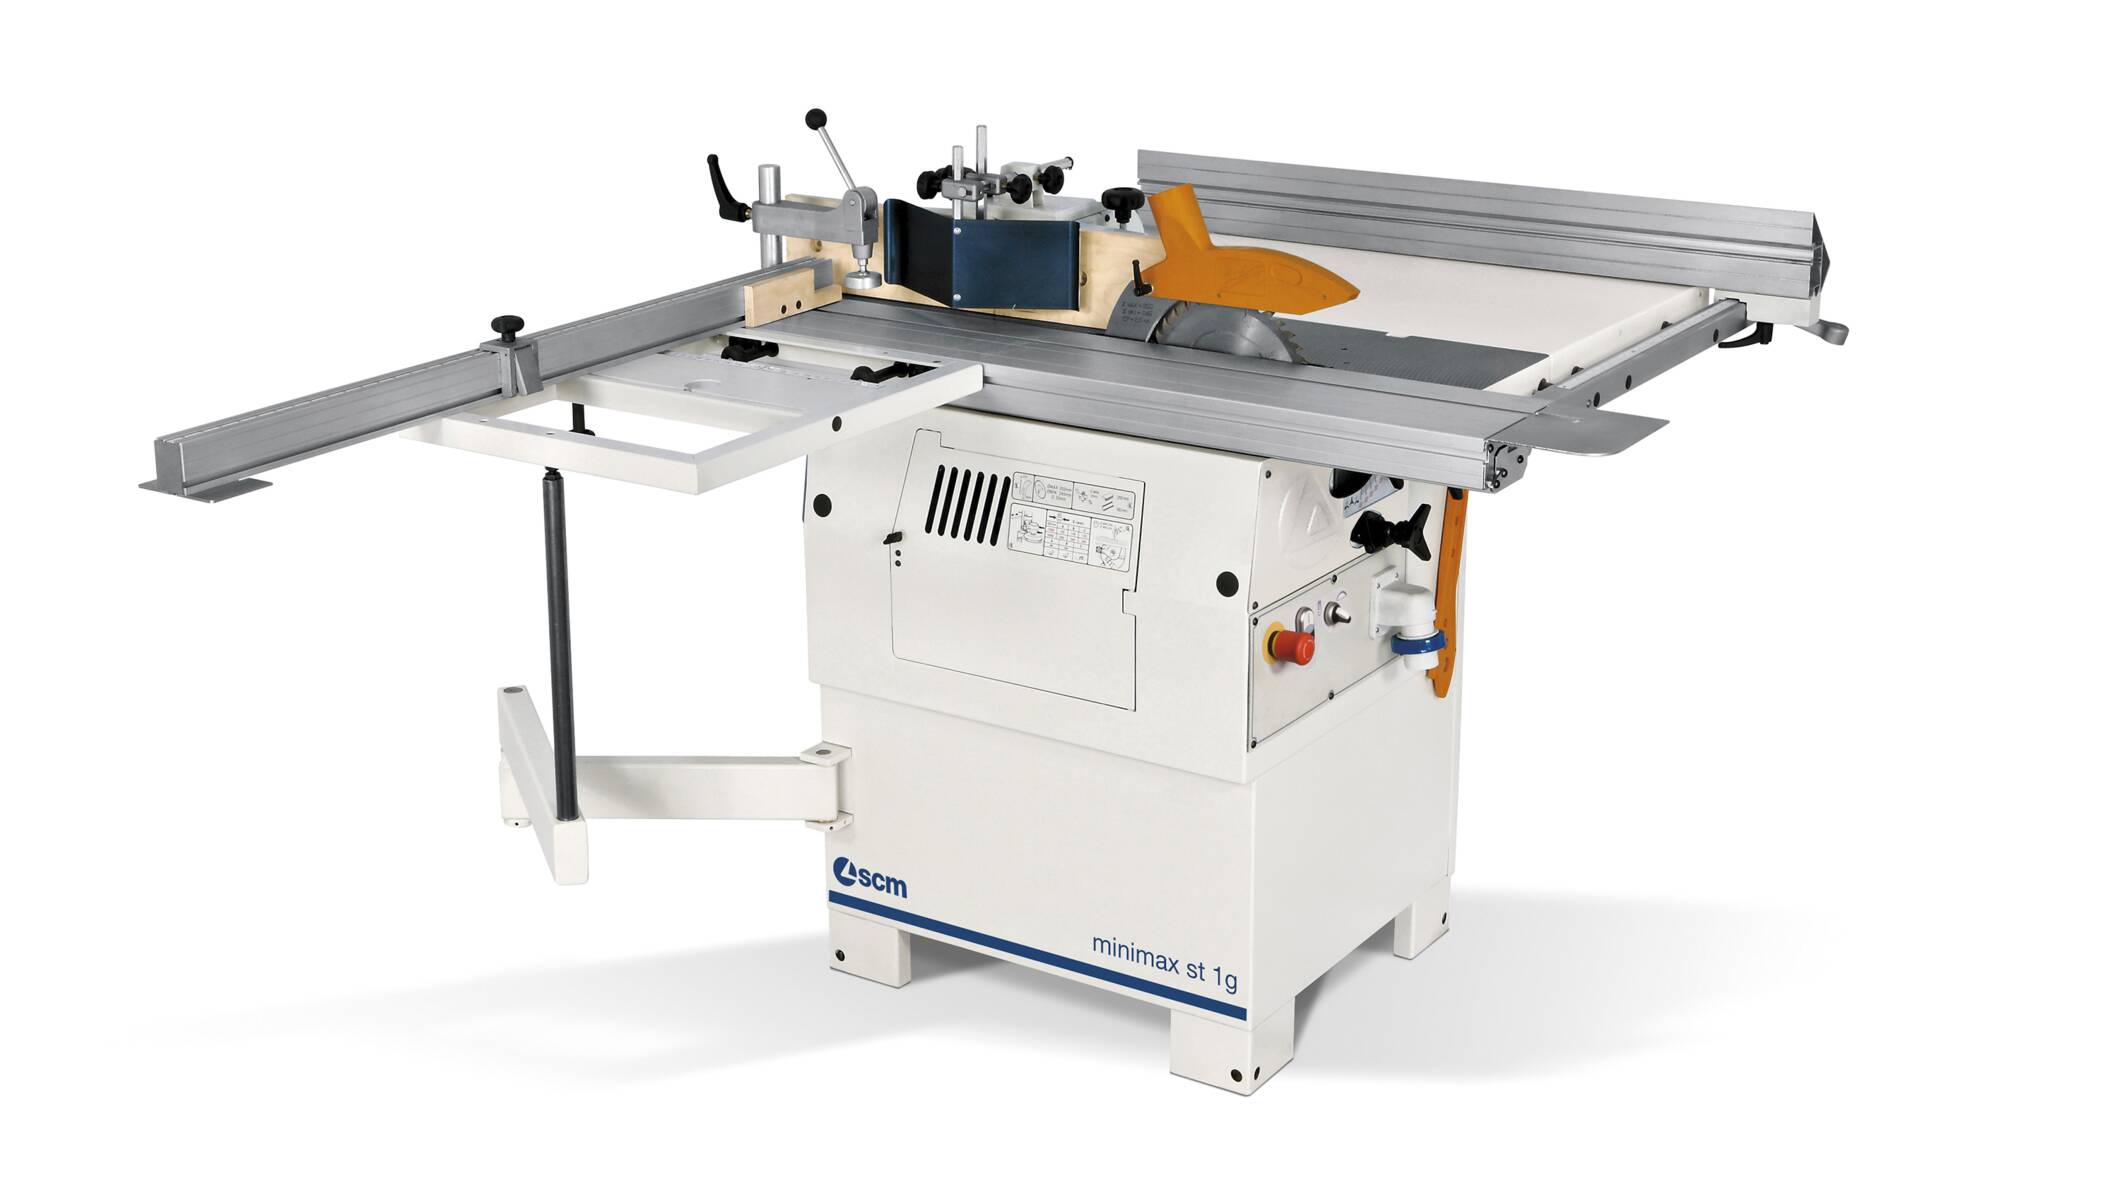 Joinery machines - Saw / shaper combination machines - minimax st 1g